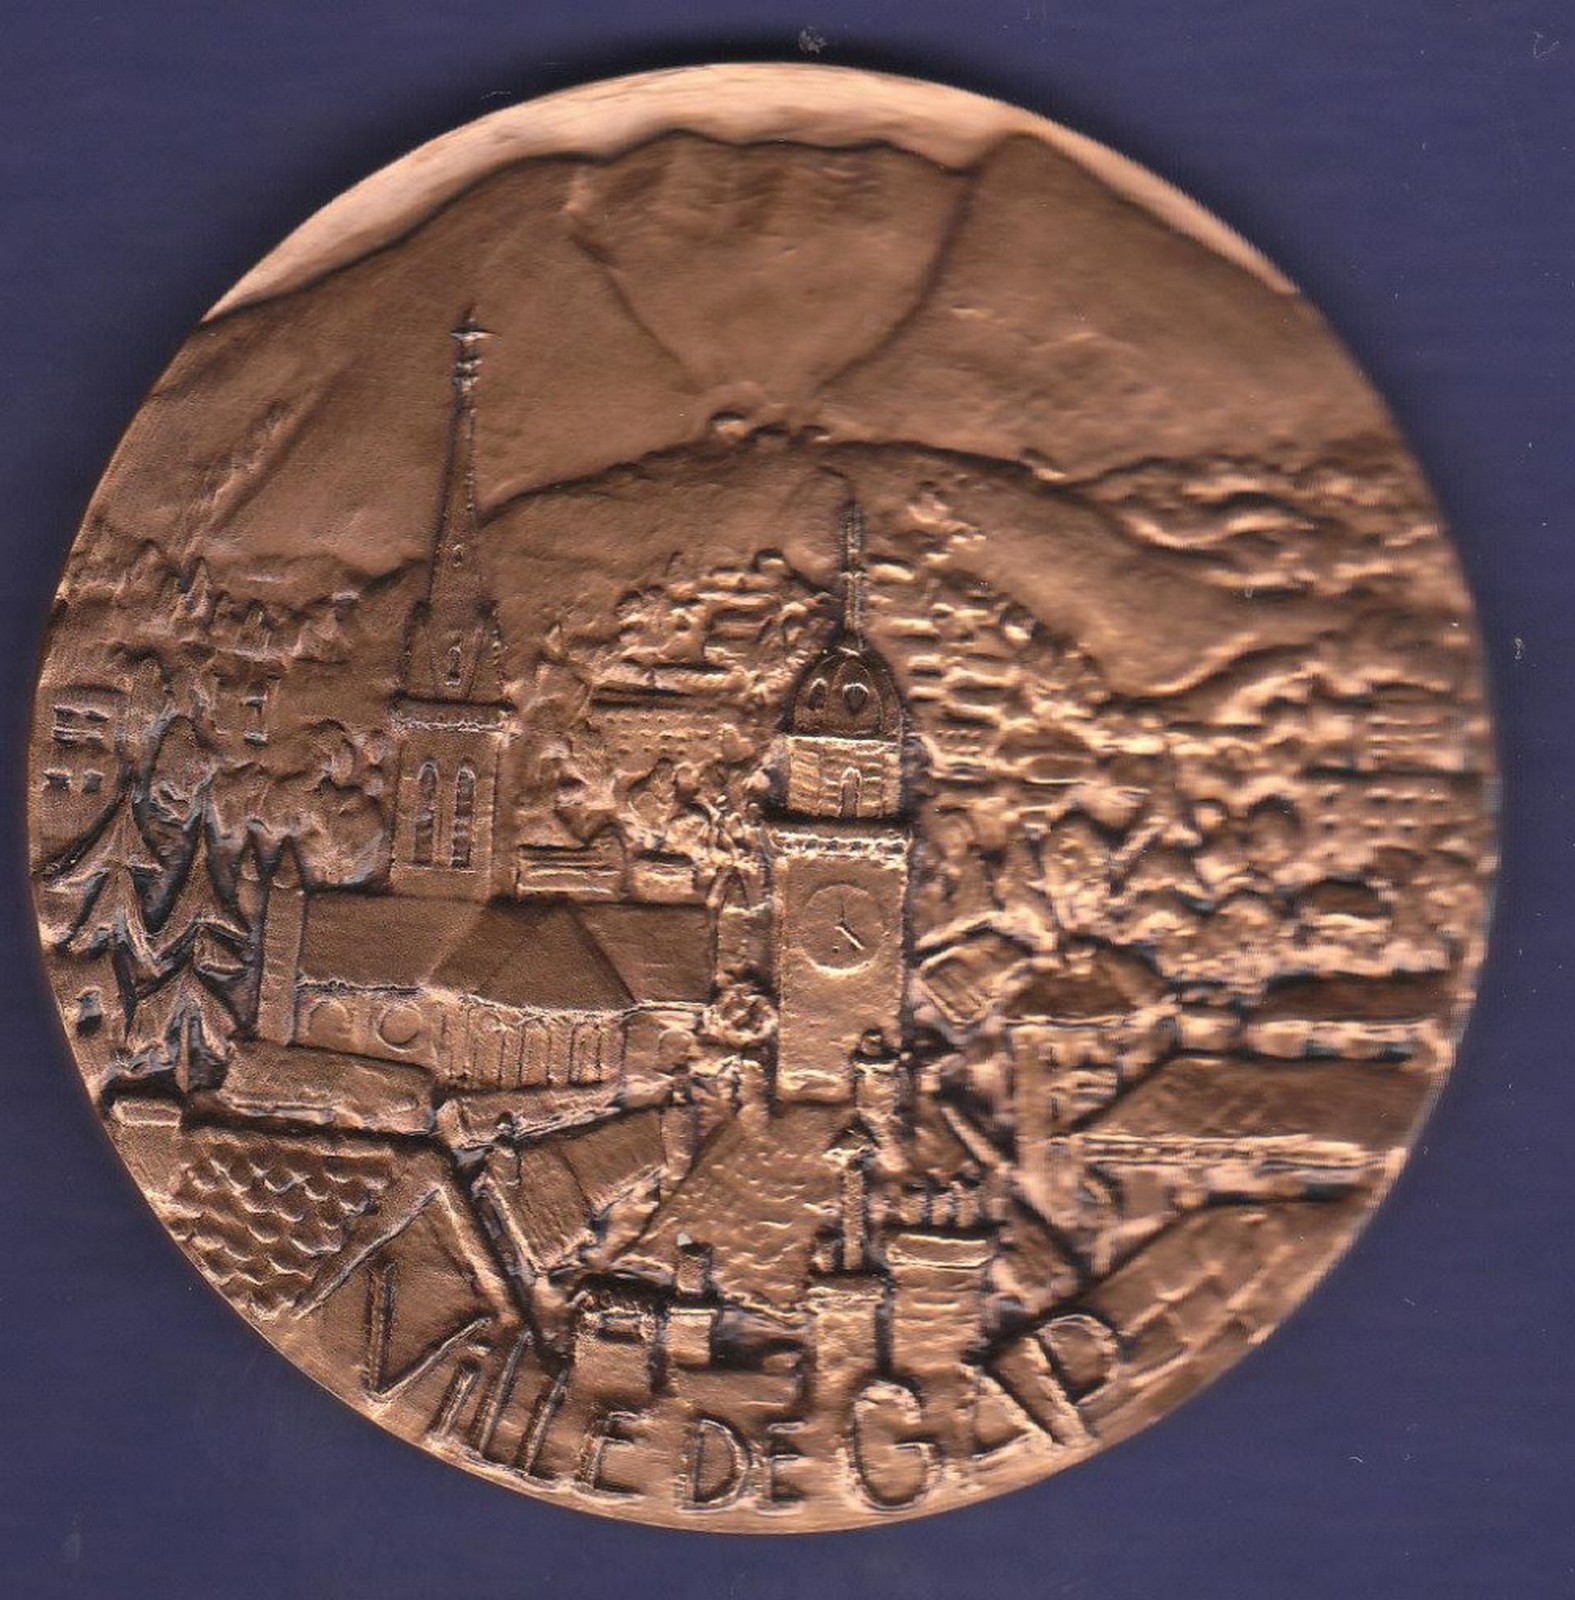 Ville De Gap Medallion, made by Querolle SC.1972. Large and made from bronze with a cityscape on the